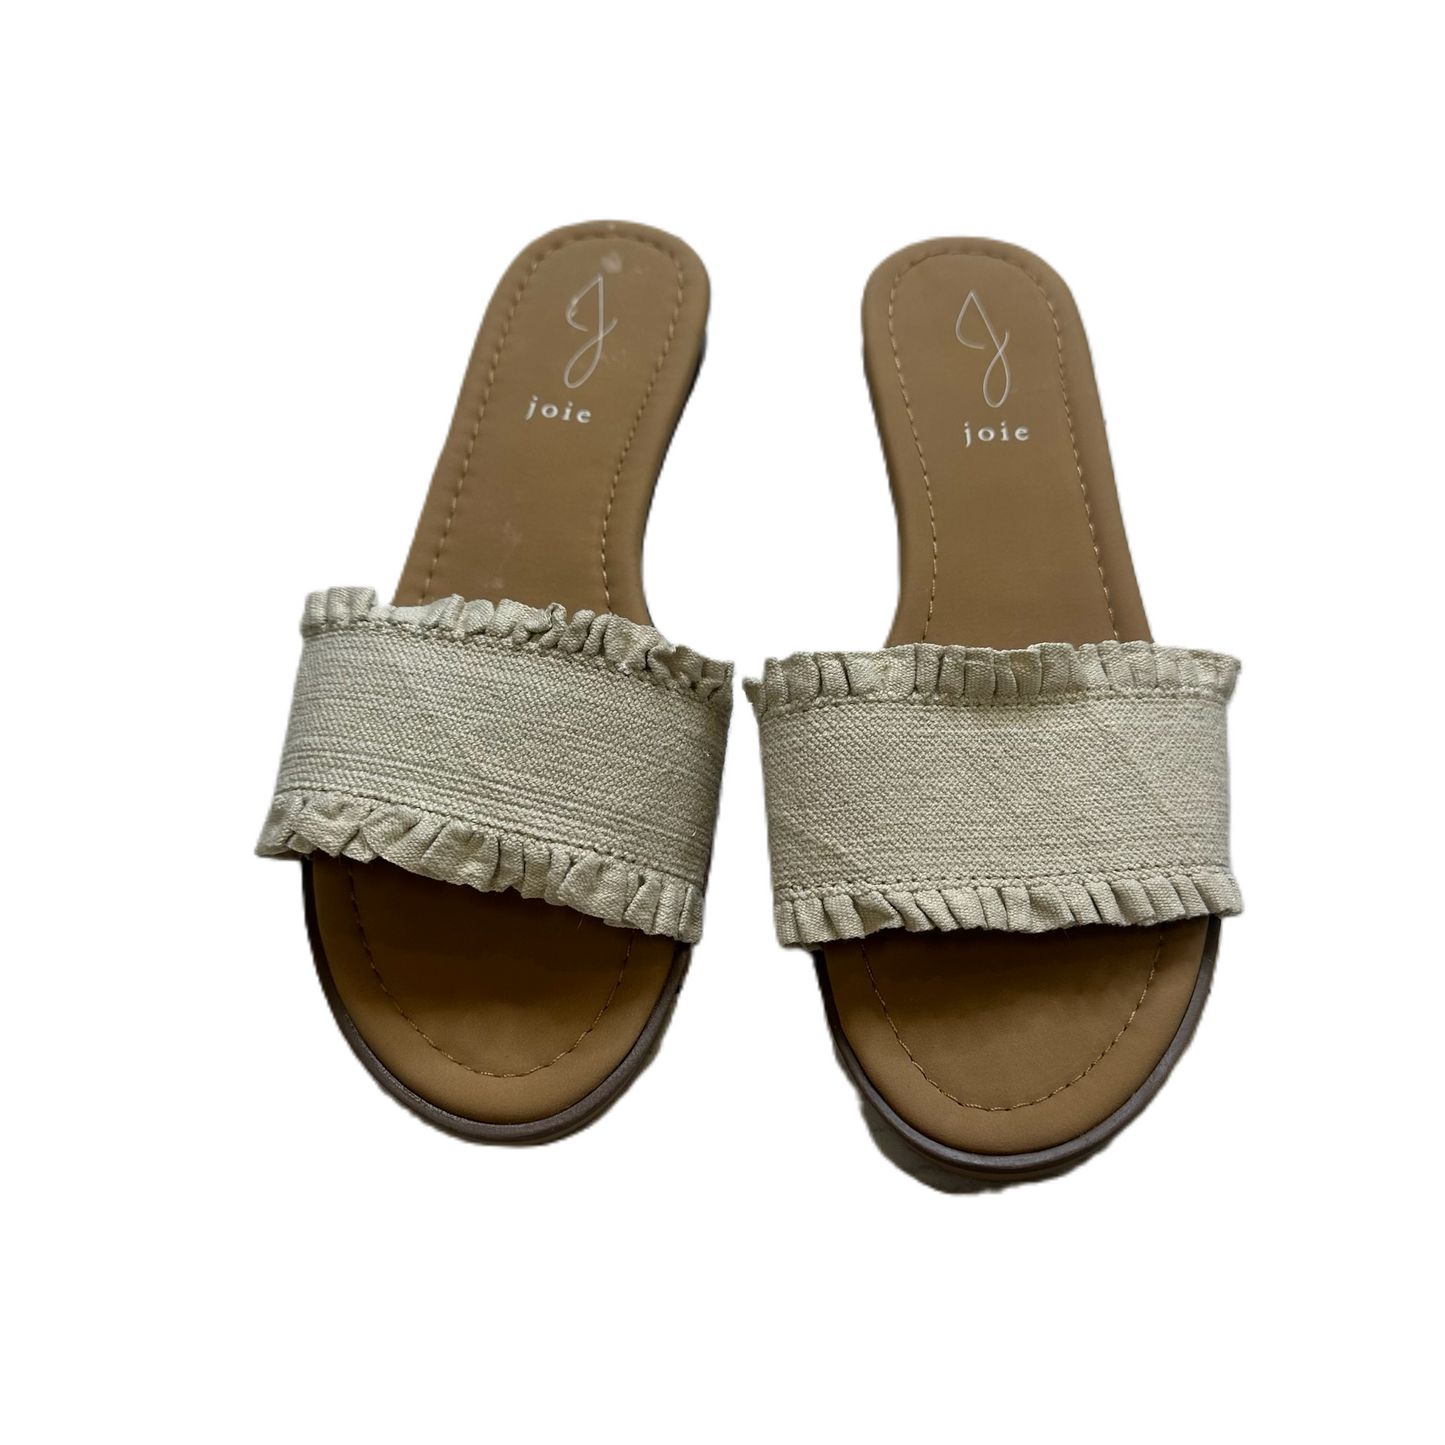 Sandals Flats By Joie  Size: 9.5